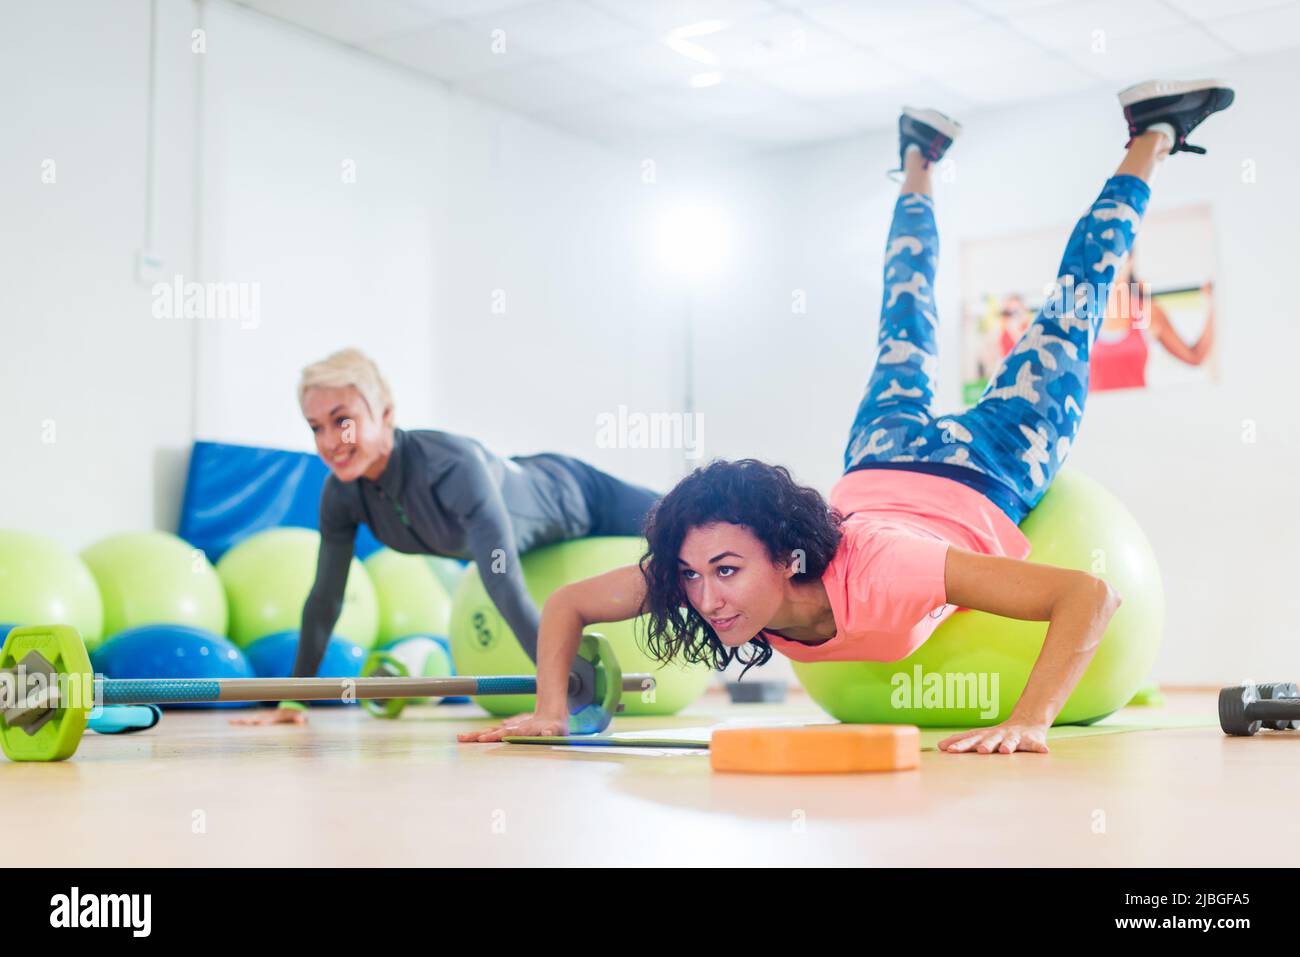 Two women exercising with stability balls doing push-ups in a gym class. Stock Photo